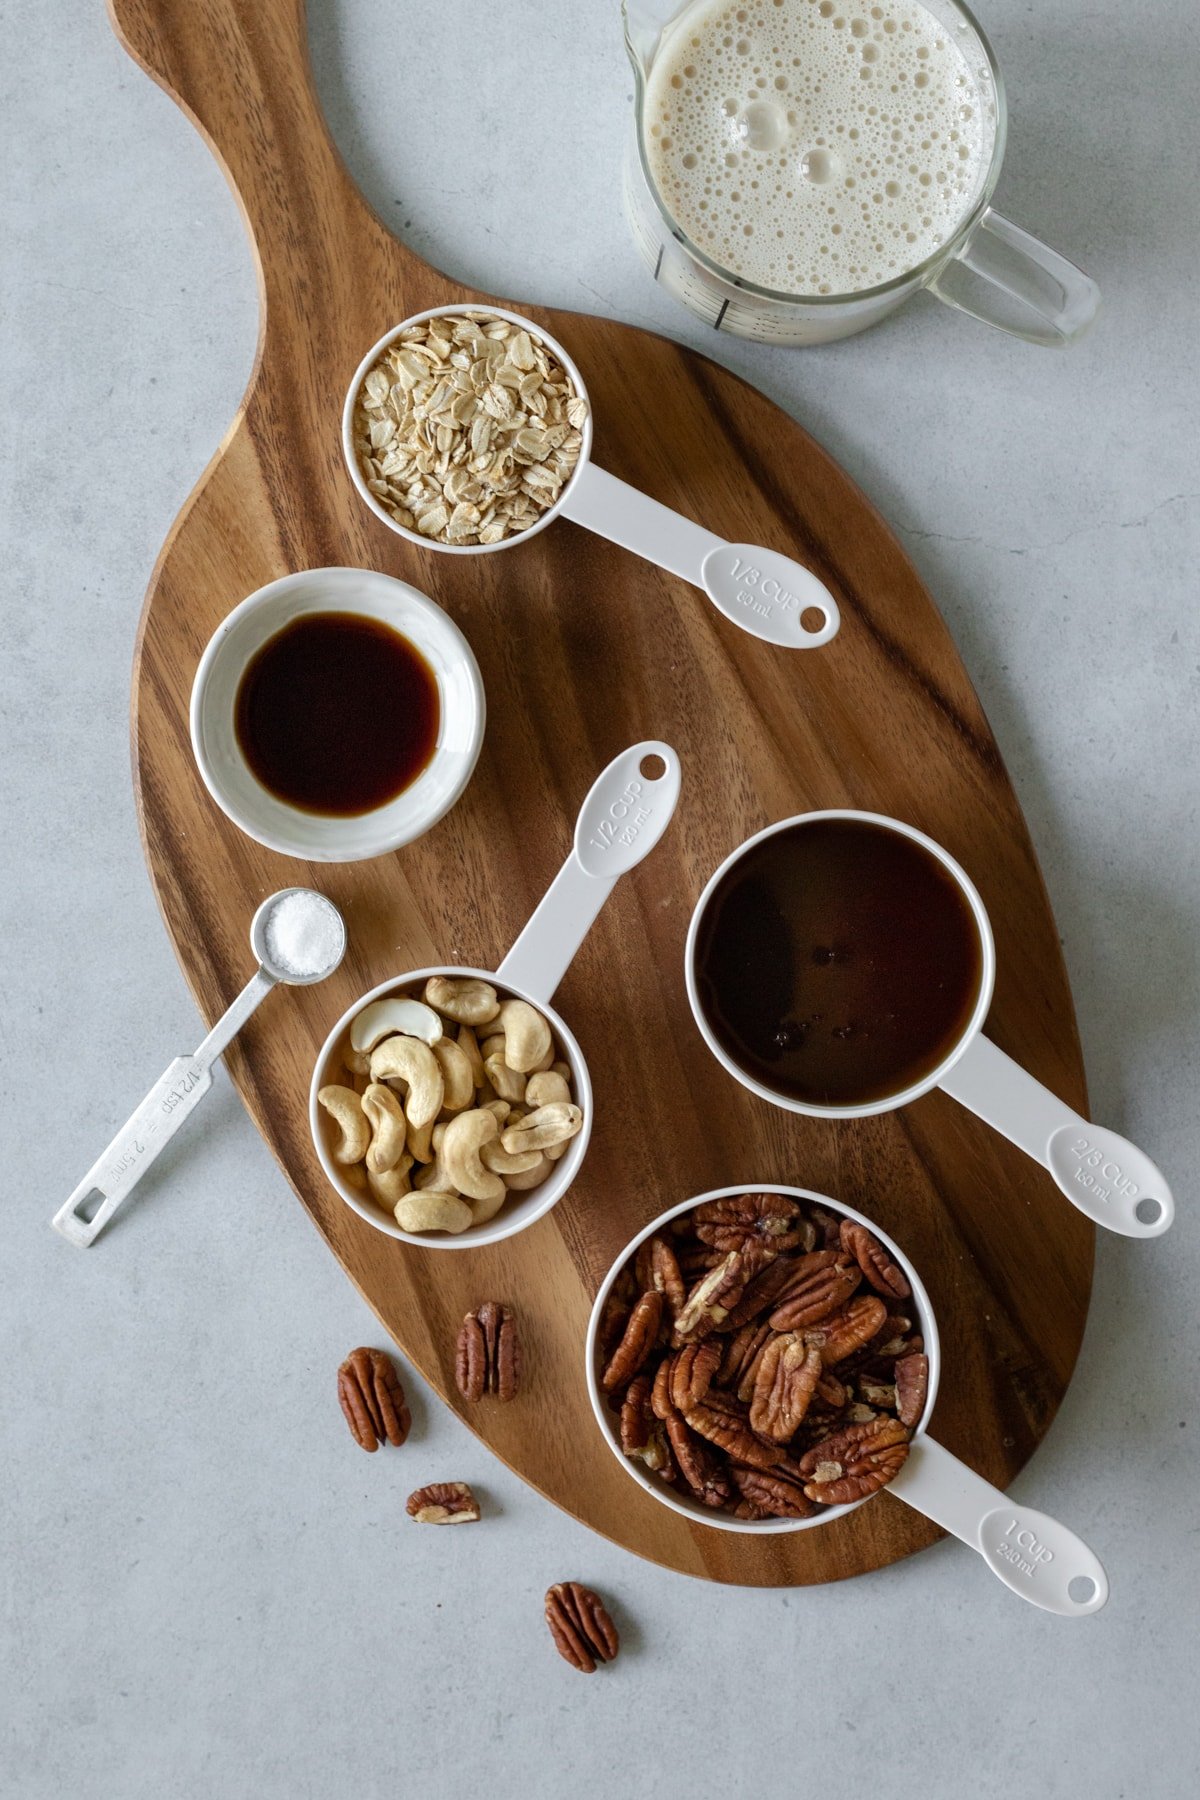 ingredients laid out on a wooden board